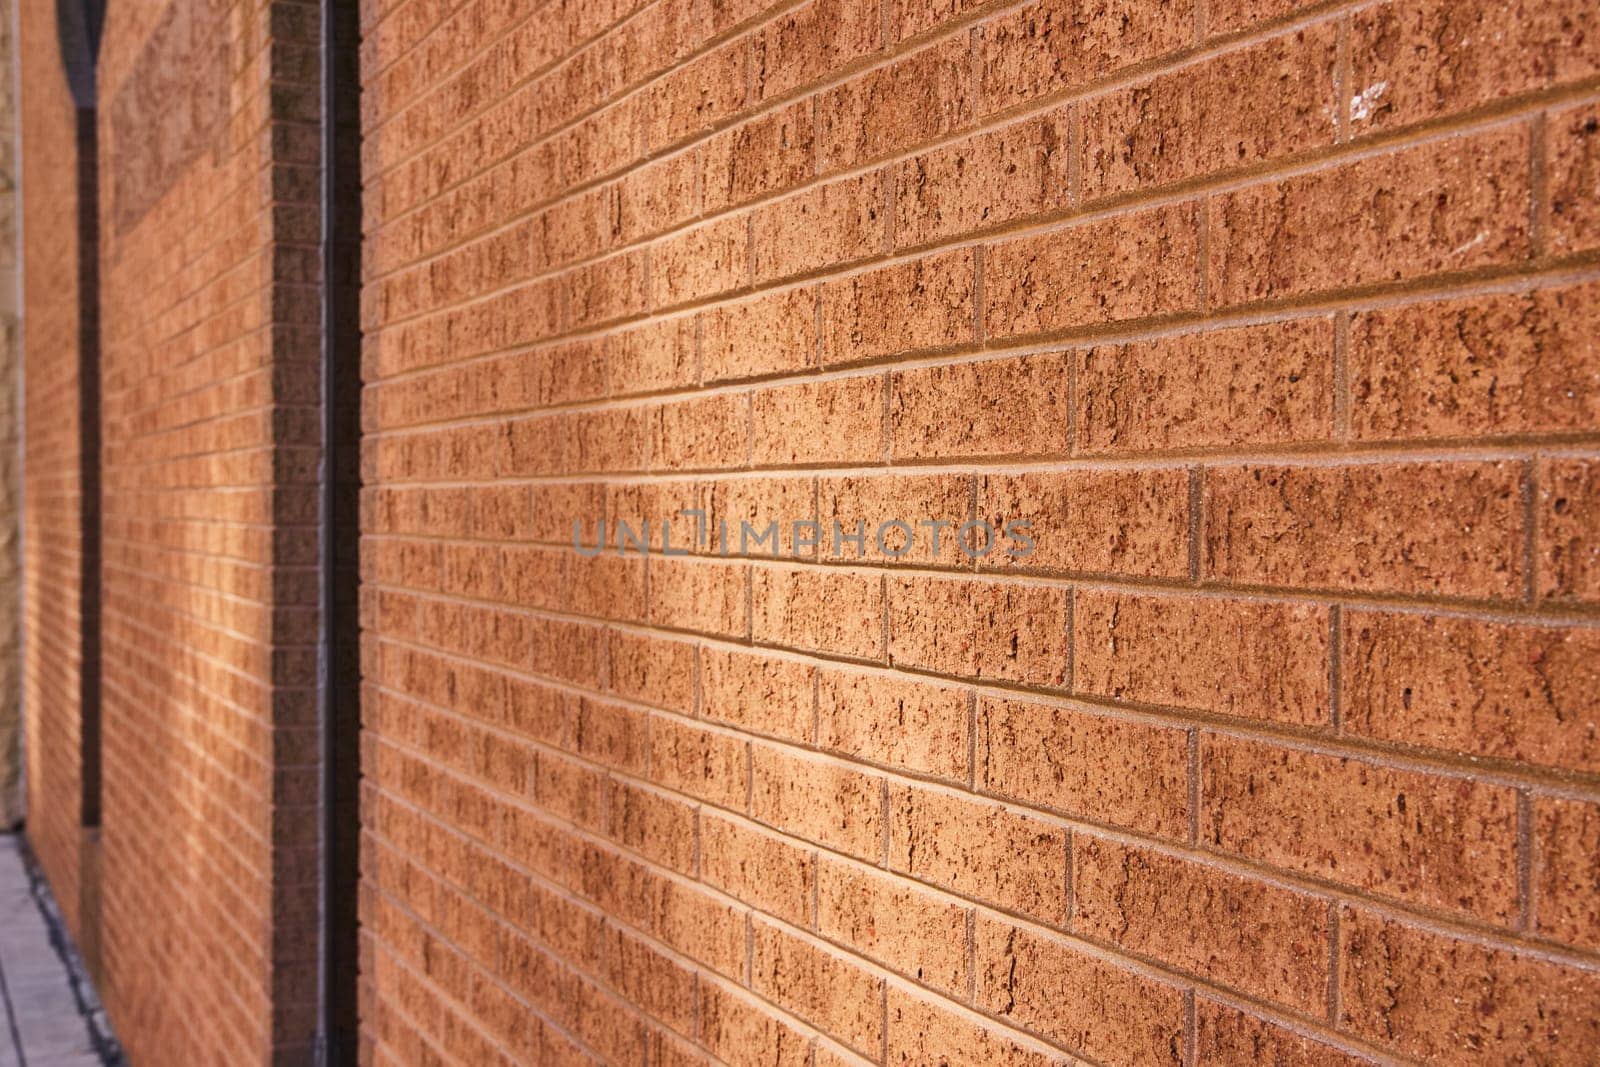 Close-up of a textured brick wall in downtown Fort Wayne, Indiana, showcasing architectural detail and craftsmanship.